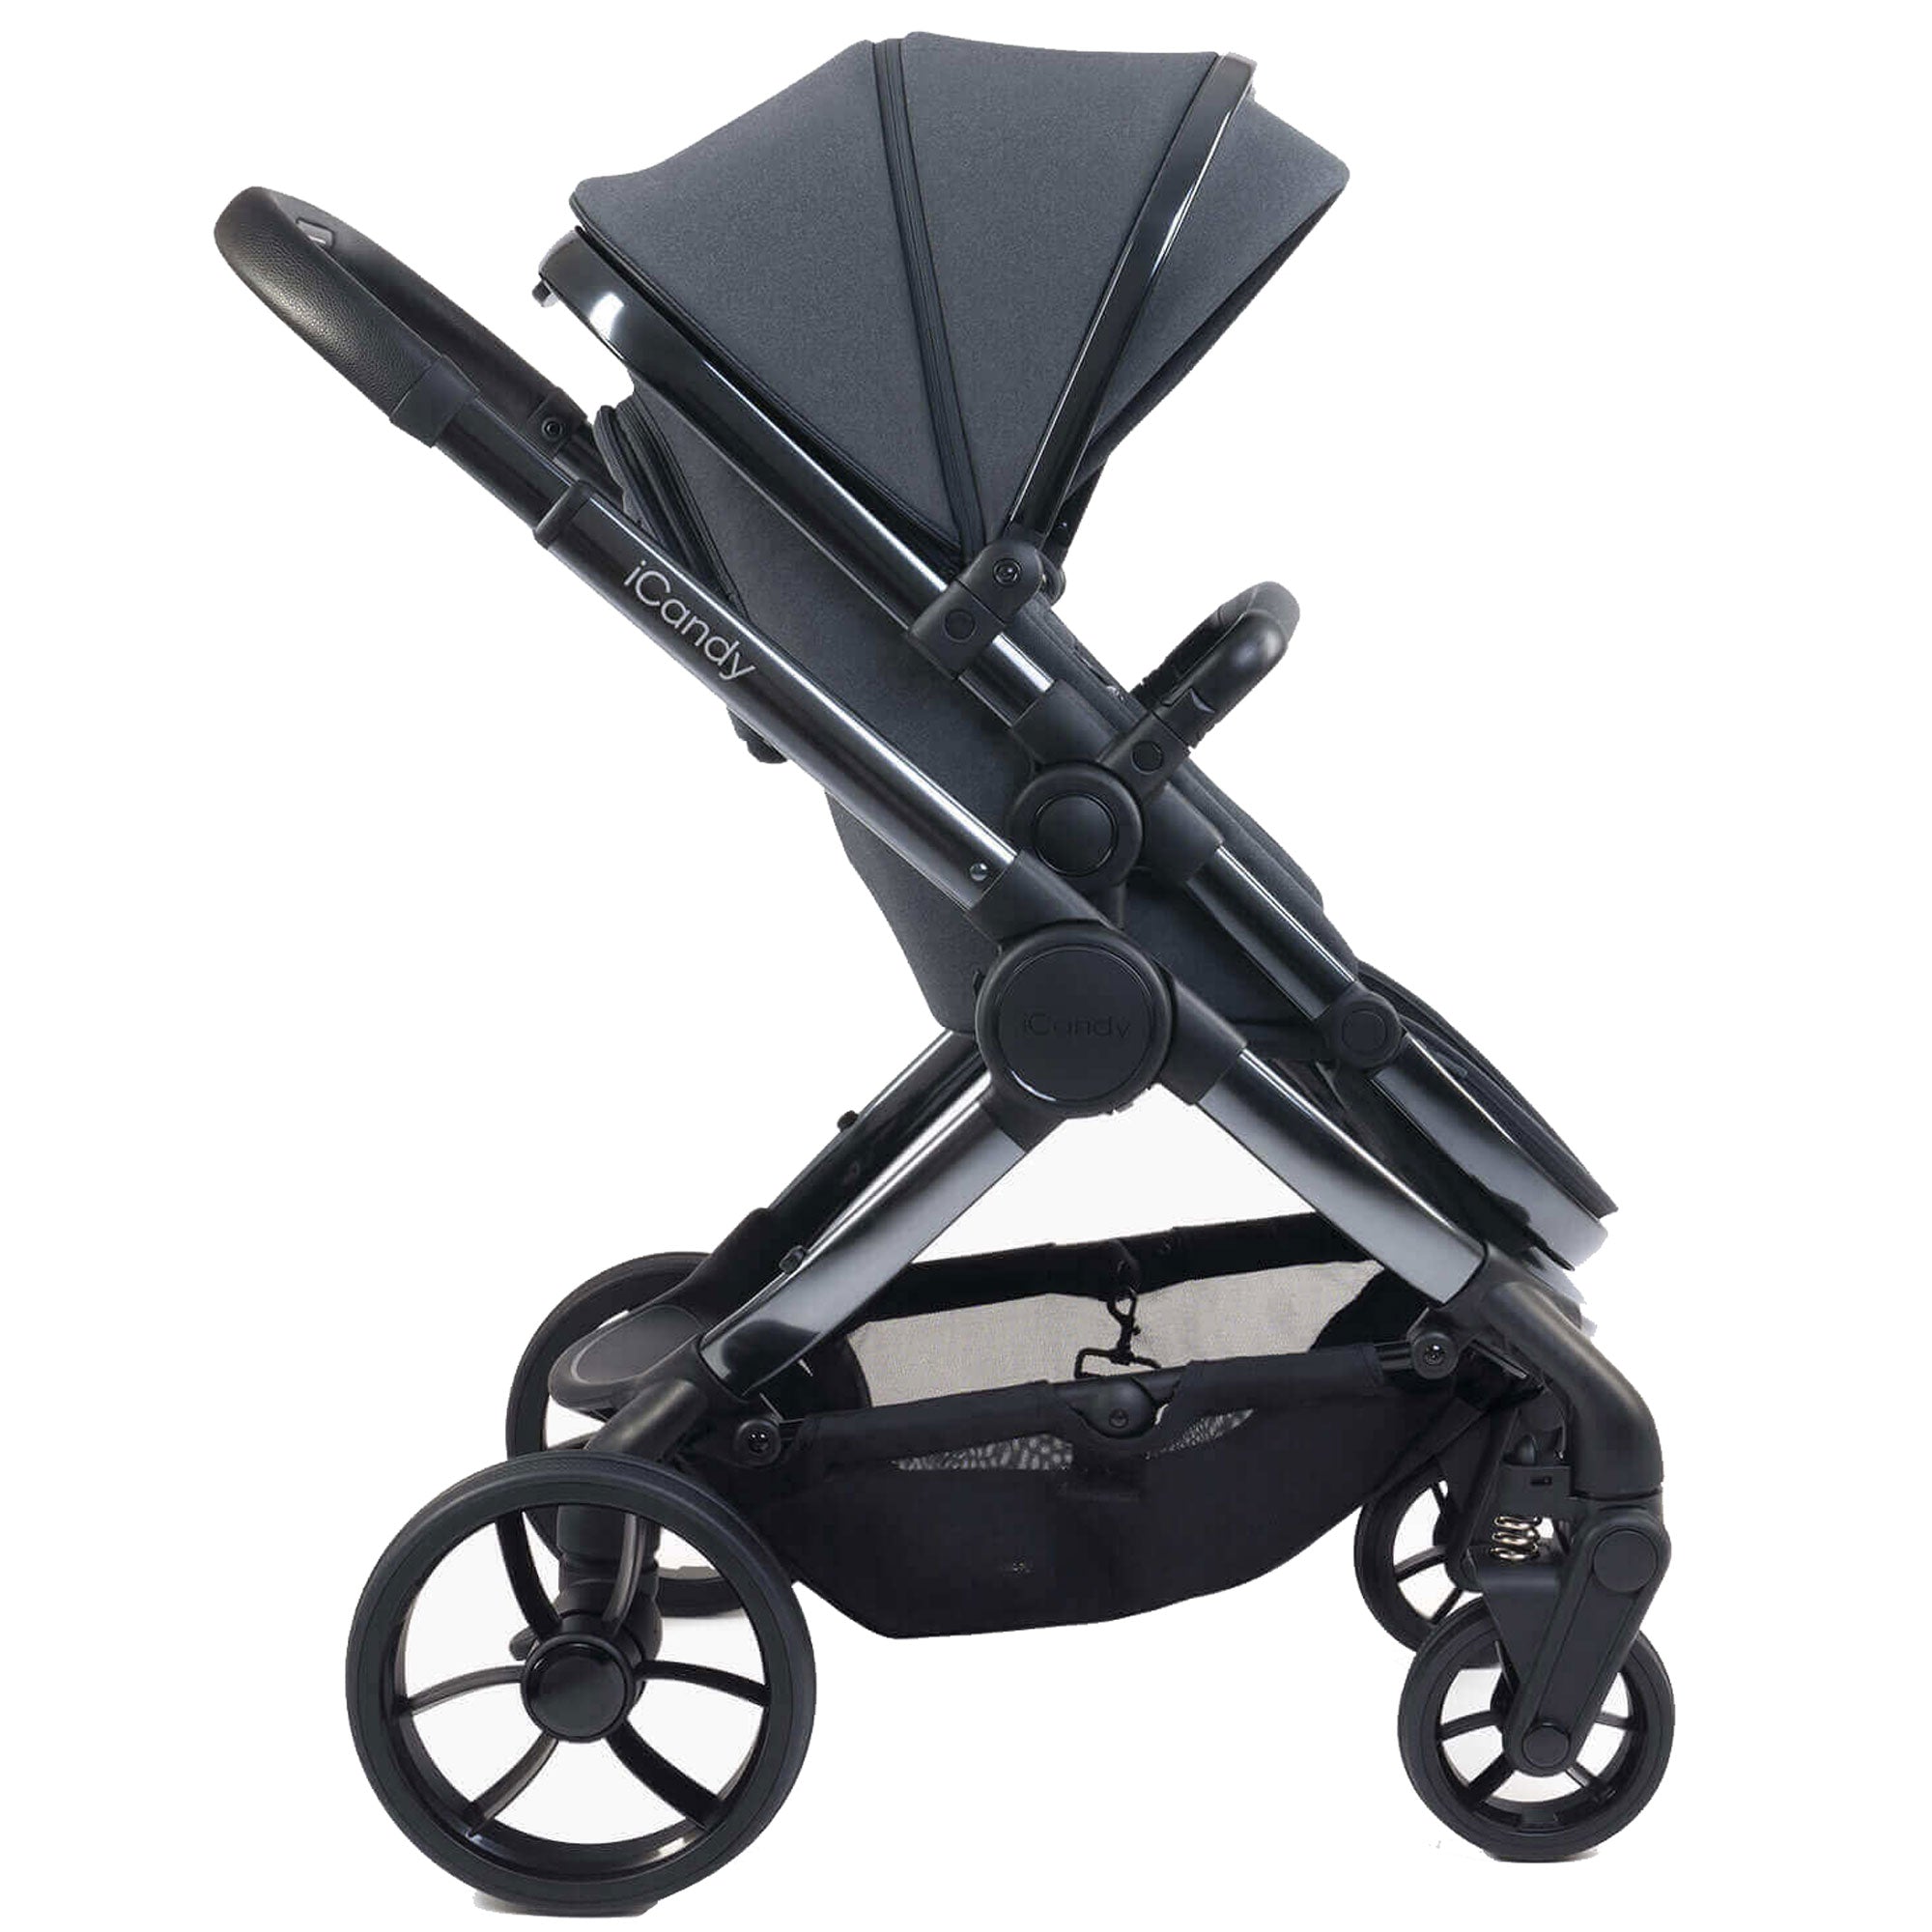 iCandy Peach 7 Complete Cybex Bundle in Truffle